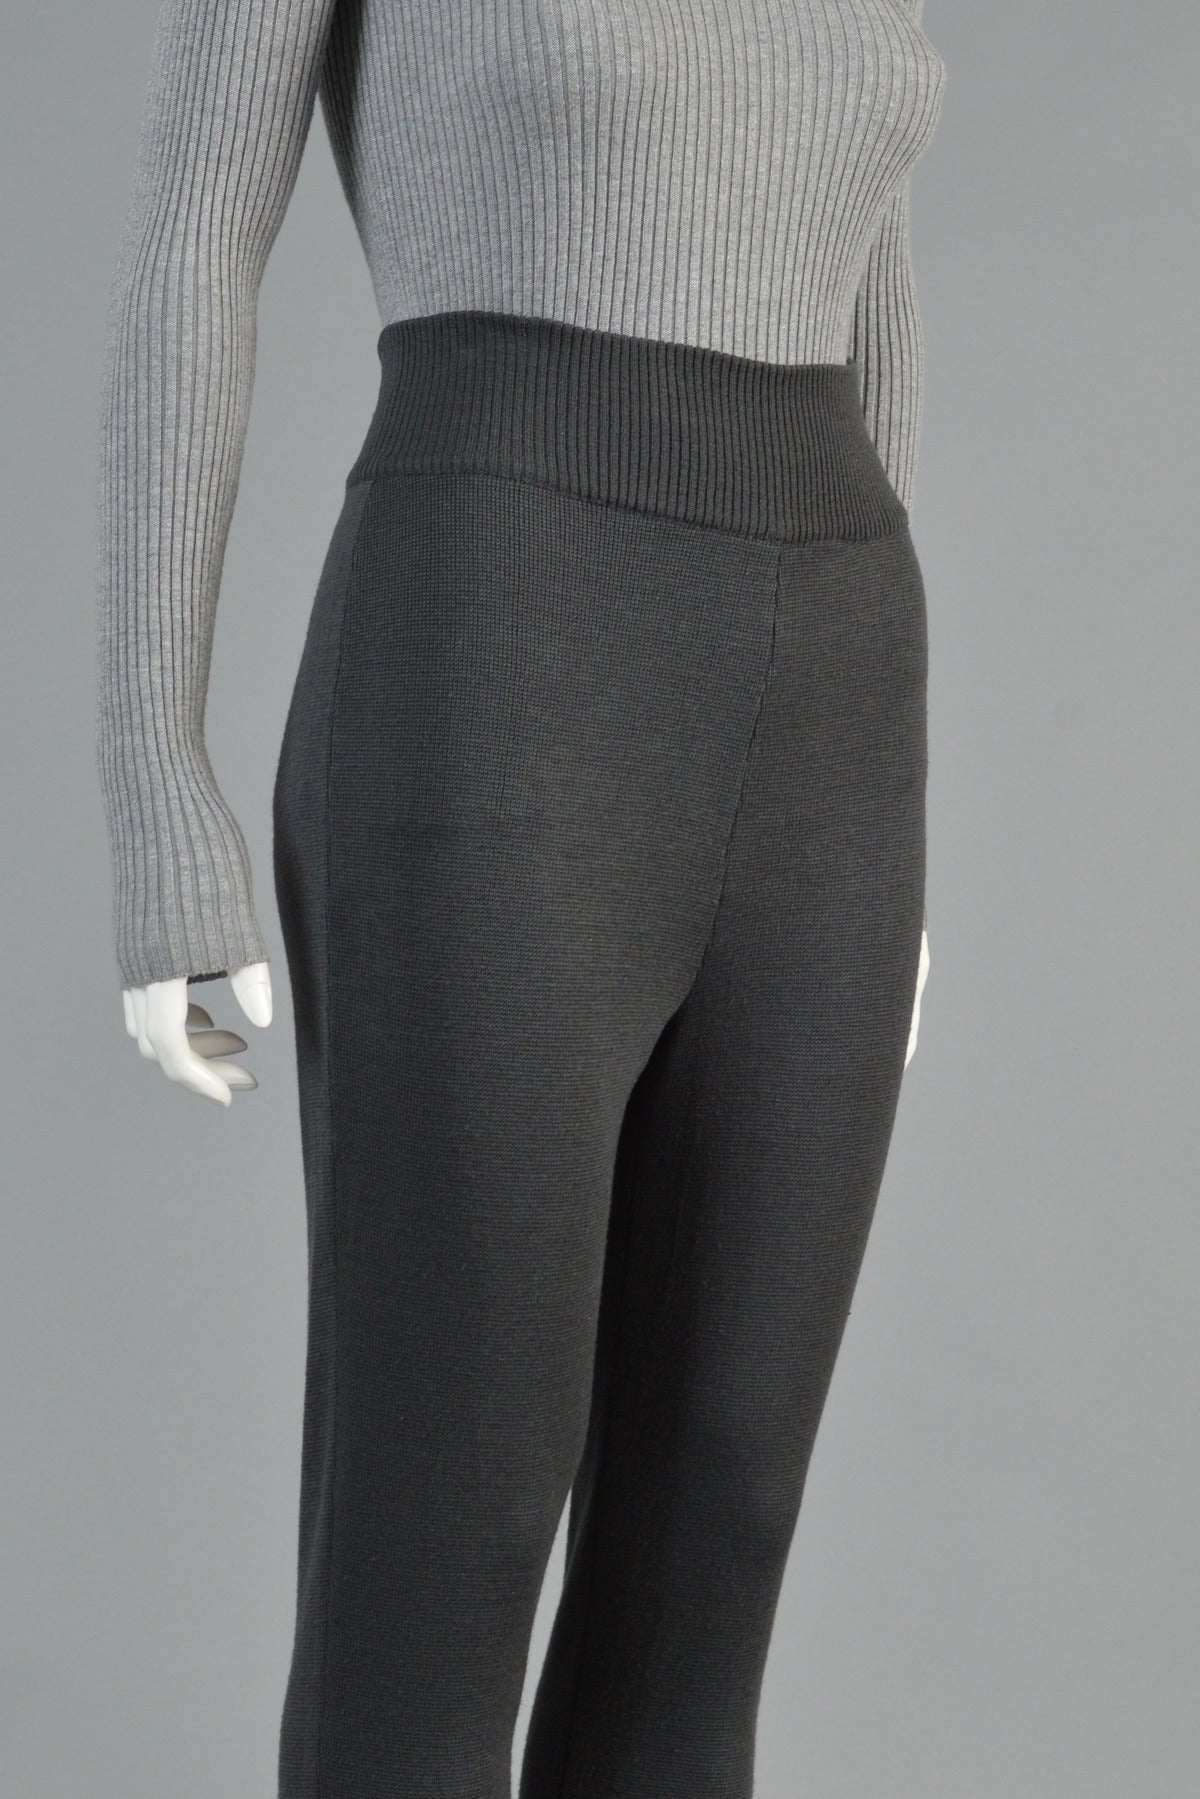 Women's Claude Montana High Waisted Knit Wool Legging Pants For Sale